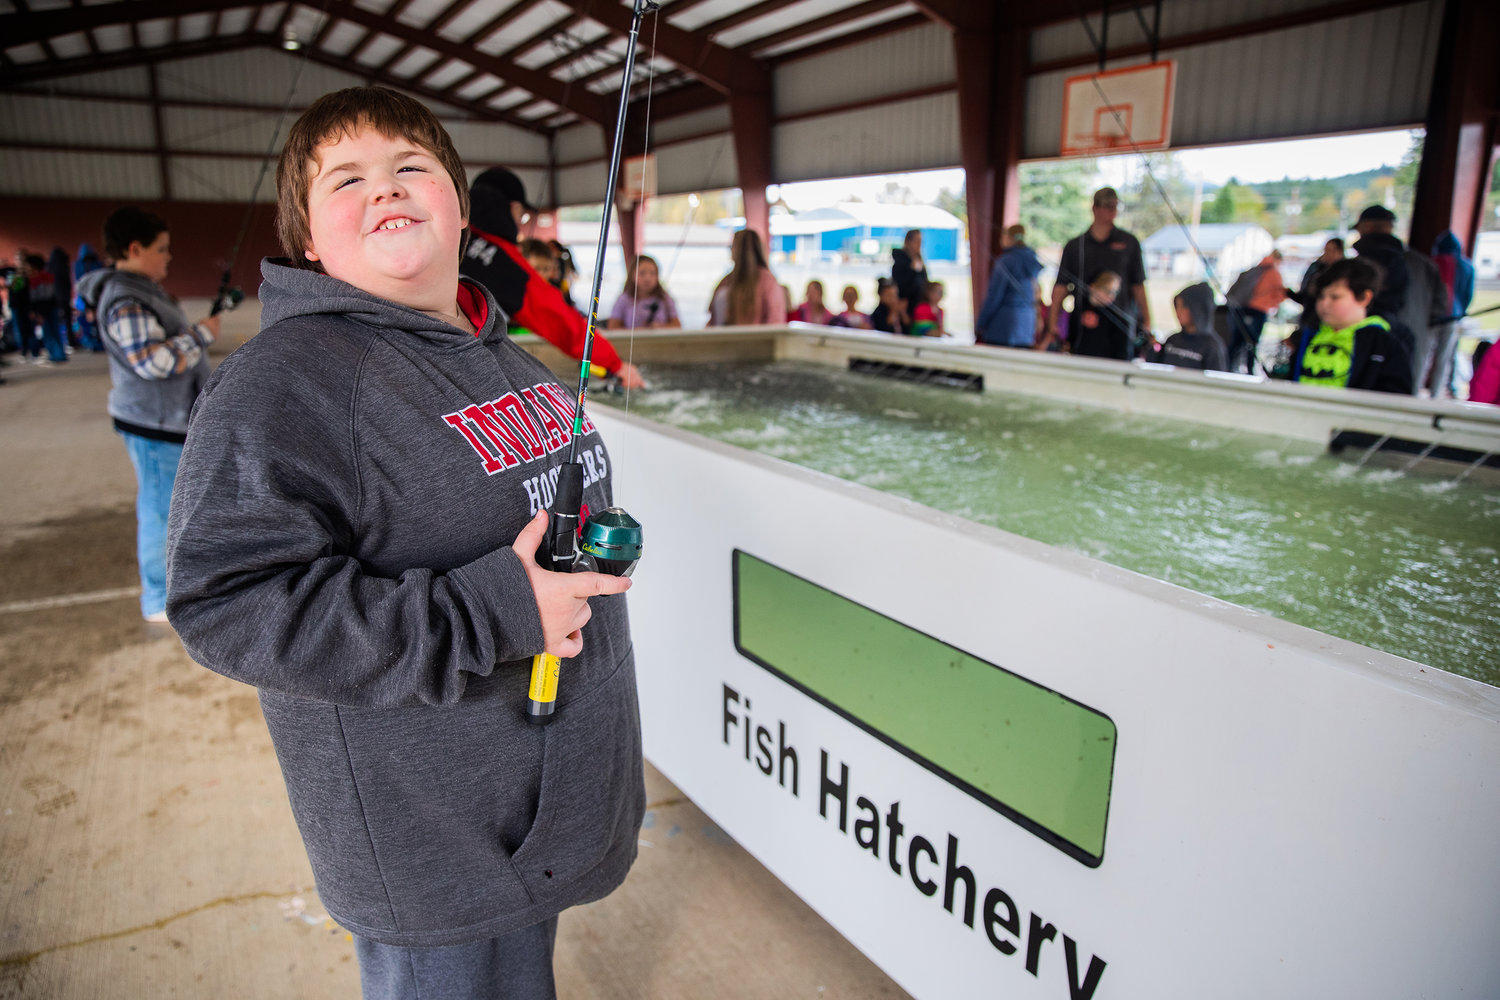 Abraham Kistennacher, a fourth grade student at Morton Elementary, smiles while talking about his experience fishing Monday afternoon as a trout hatchery visits the school for a learning opportunity.